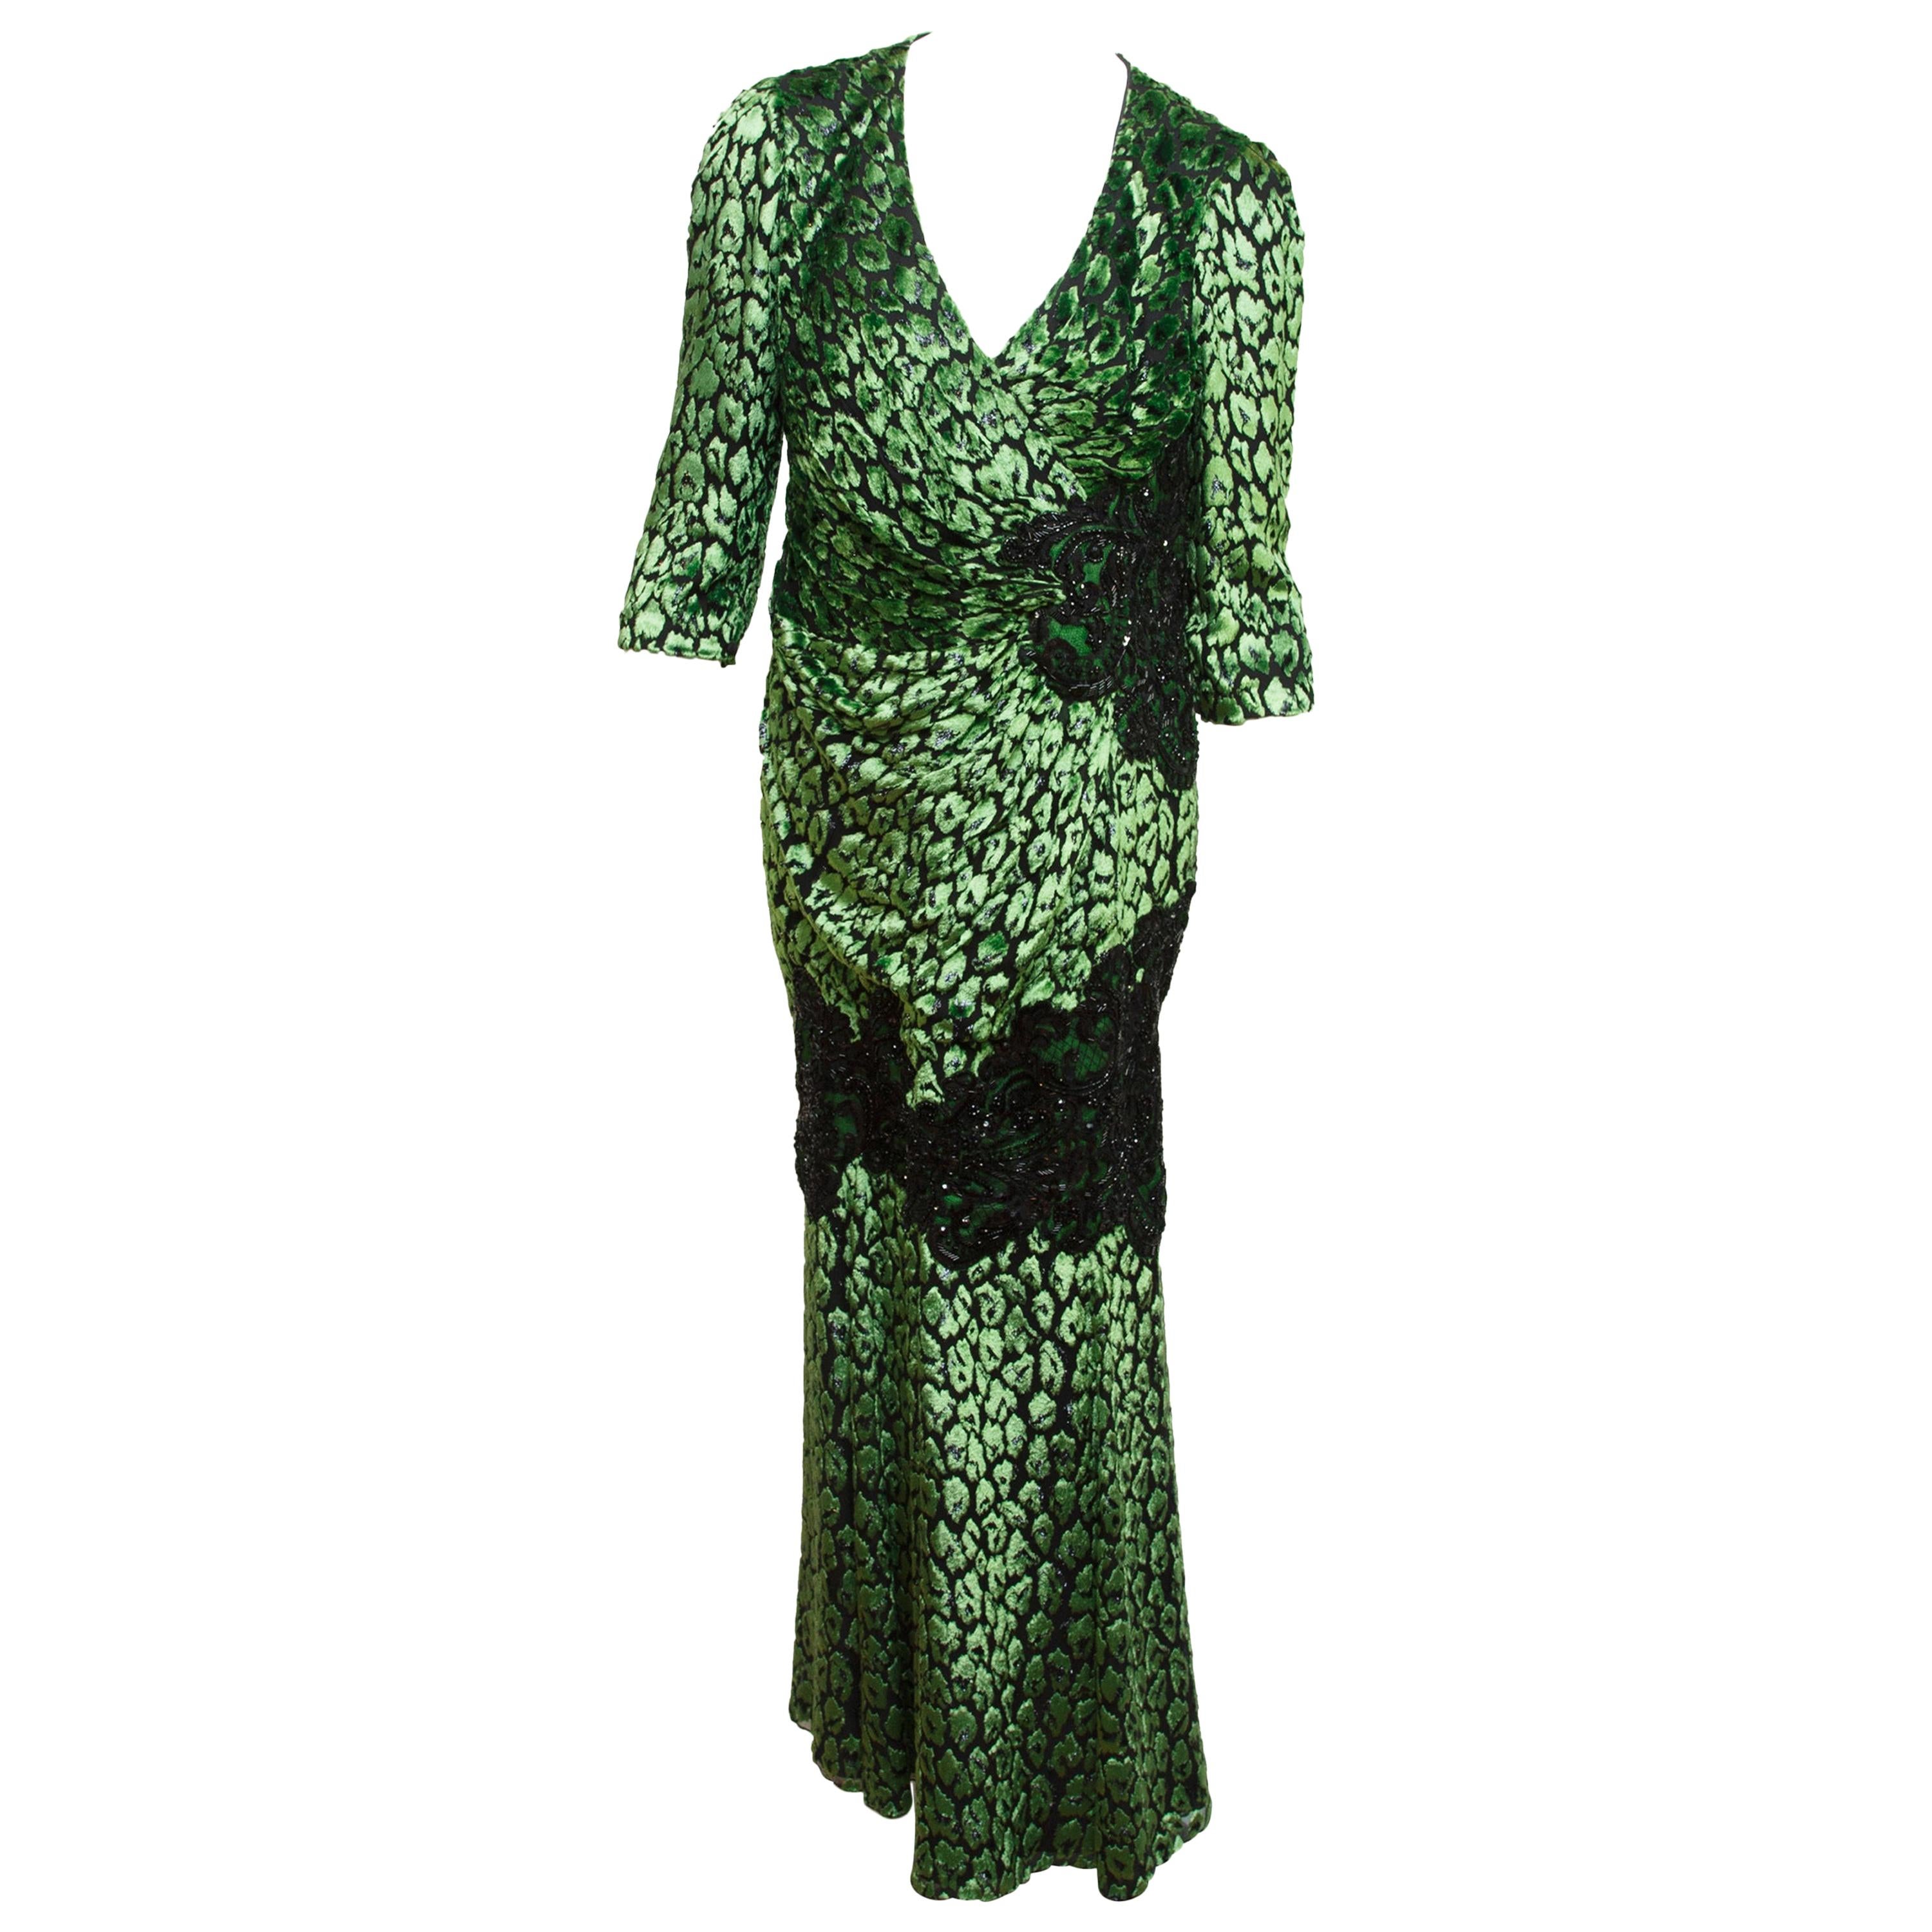 Andrew Gn Metallic Green & Black Embellished Gown